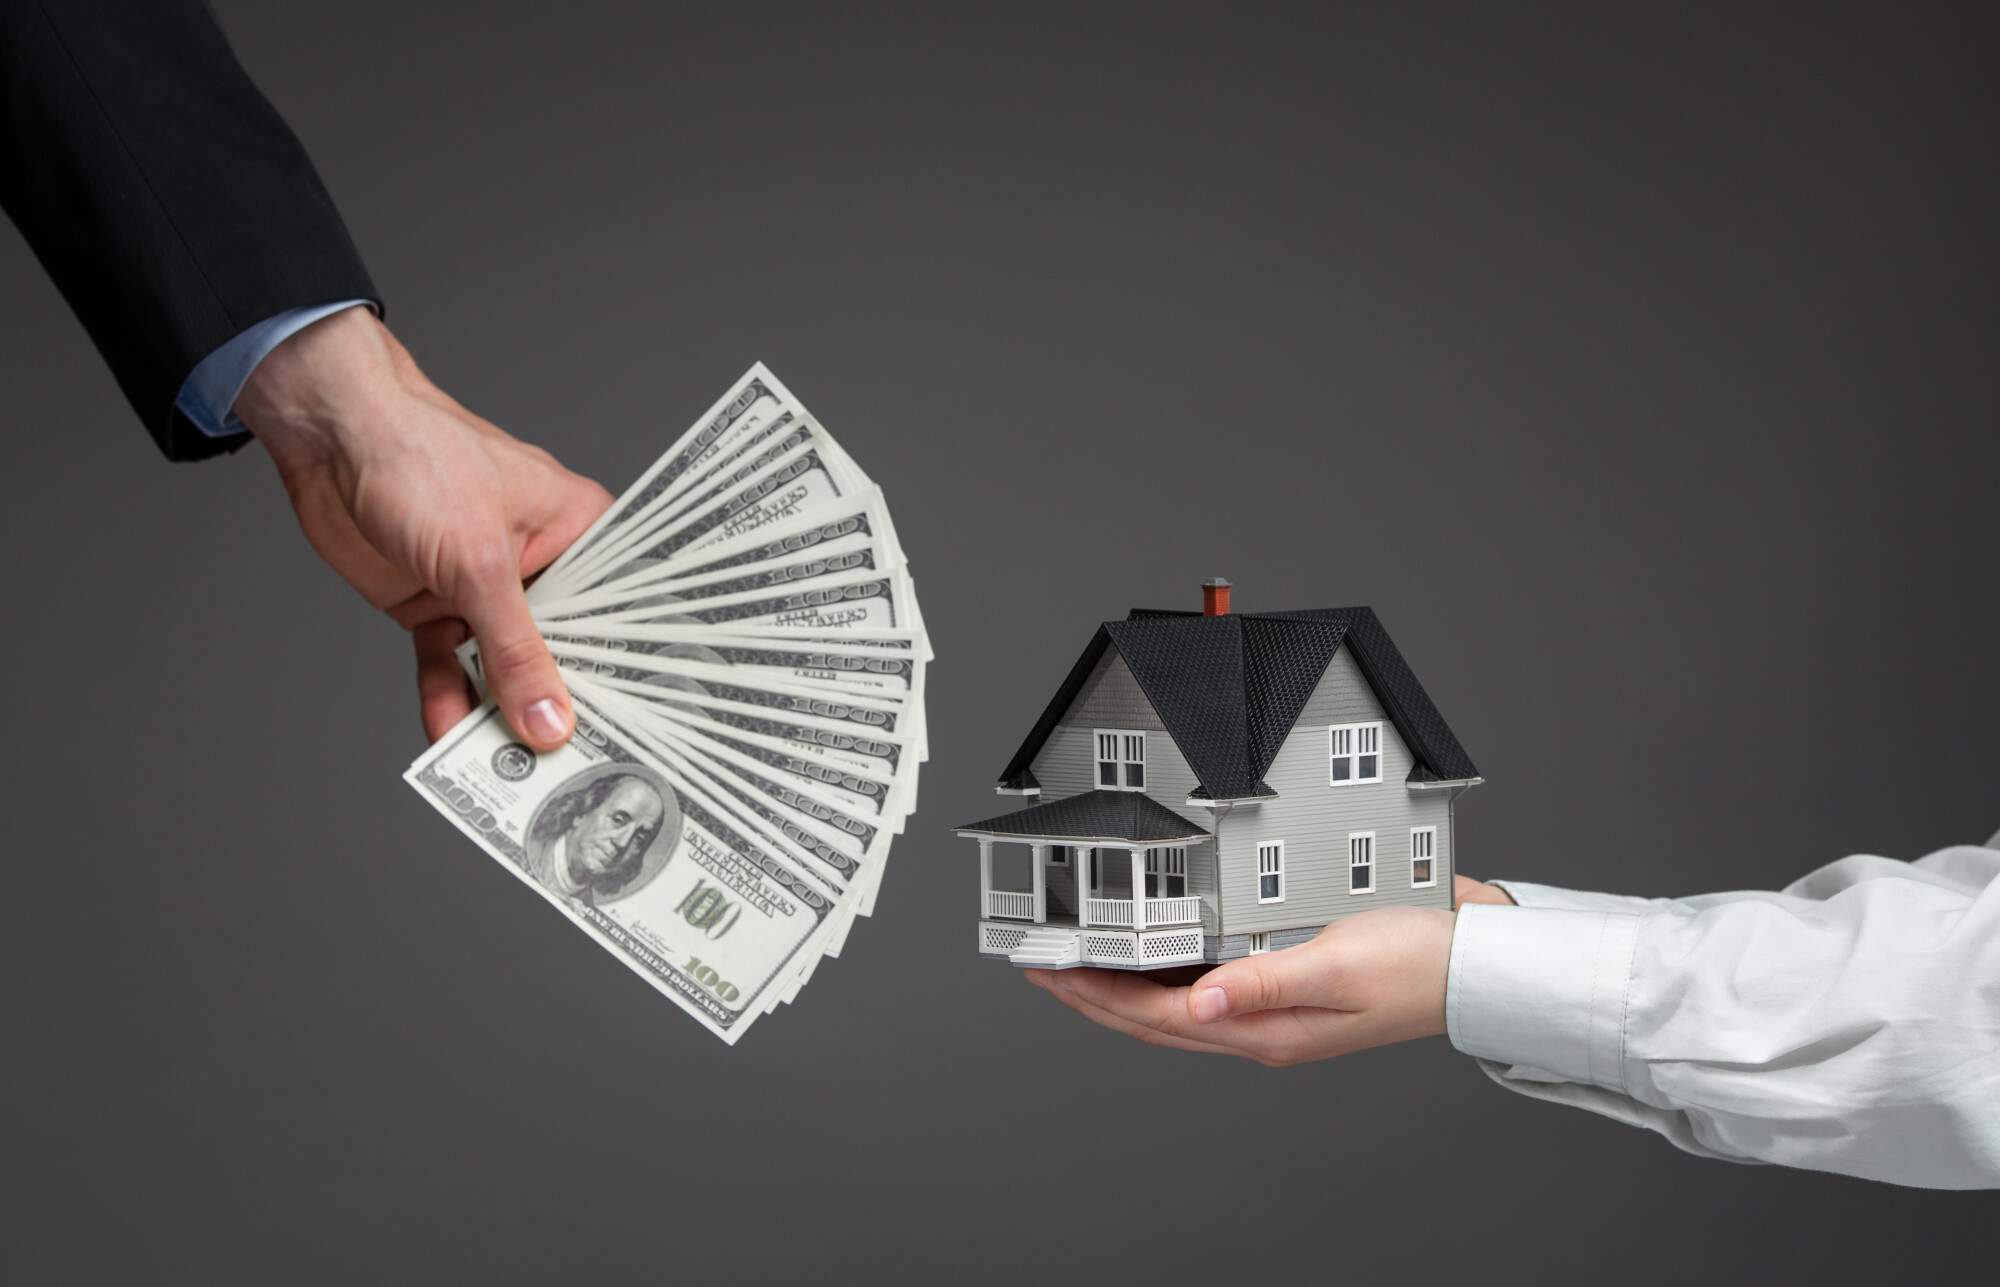 If you are trying to sell your house quickly, a cash buying service can help. Here is everything you need to know about how to pick a cash house buyer.